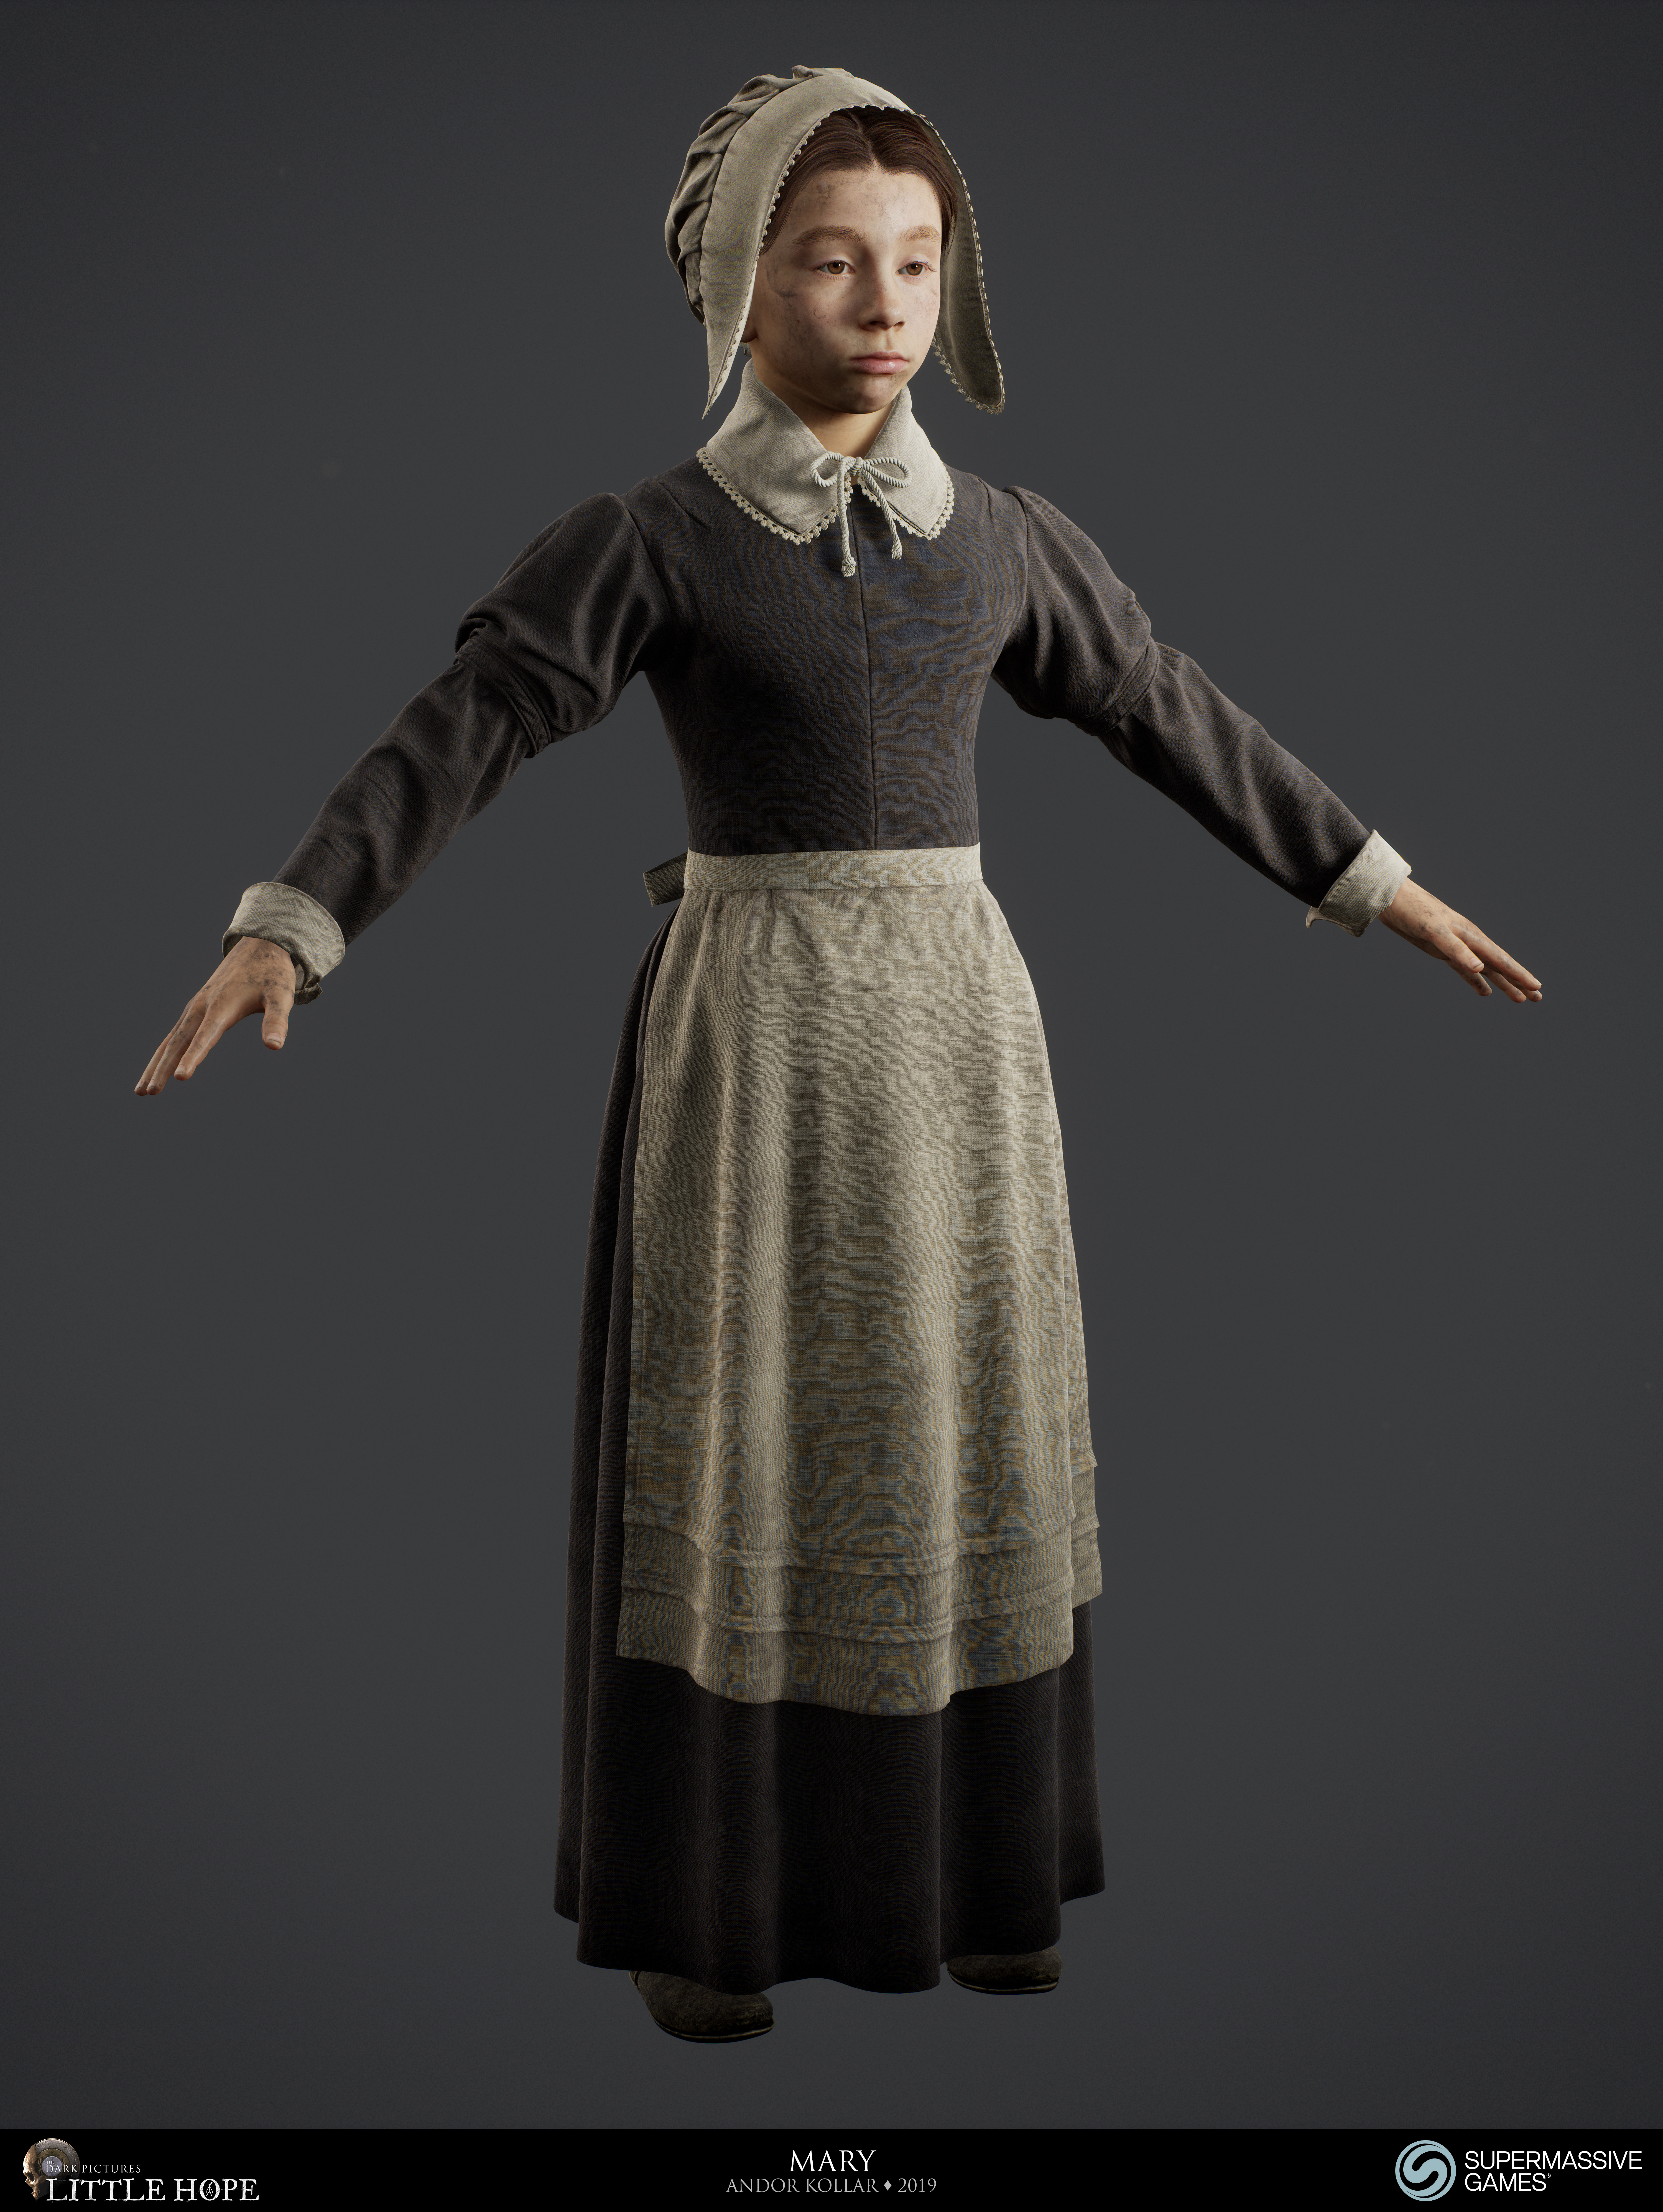 Little Hope, 3d game character, Mary, little girl with 17th century dress, bonnet, skirt, ribbon, Unreal Engine, Andor Kollar